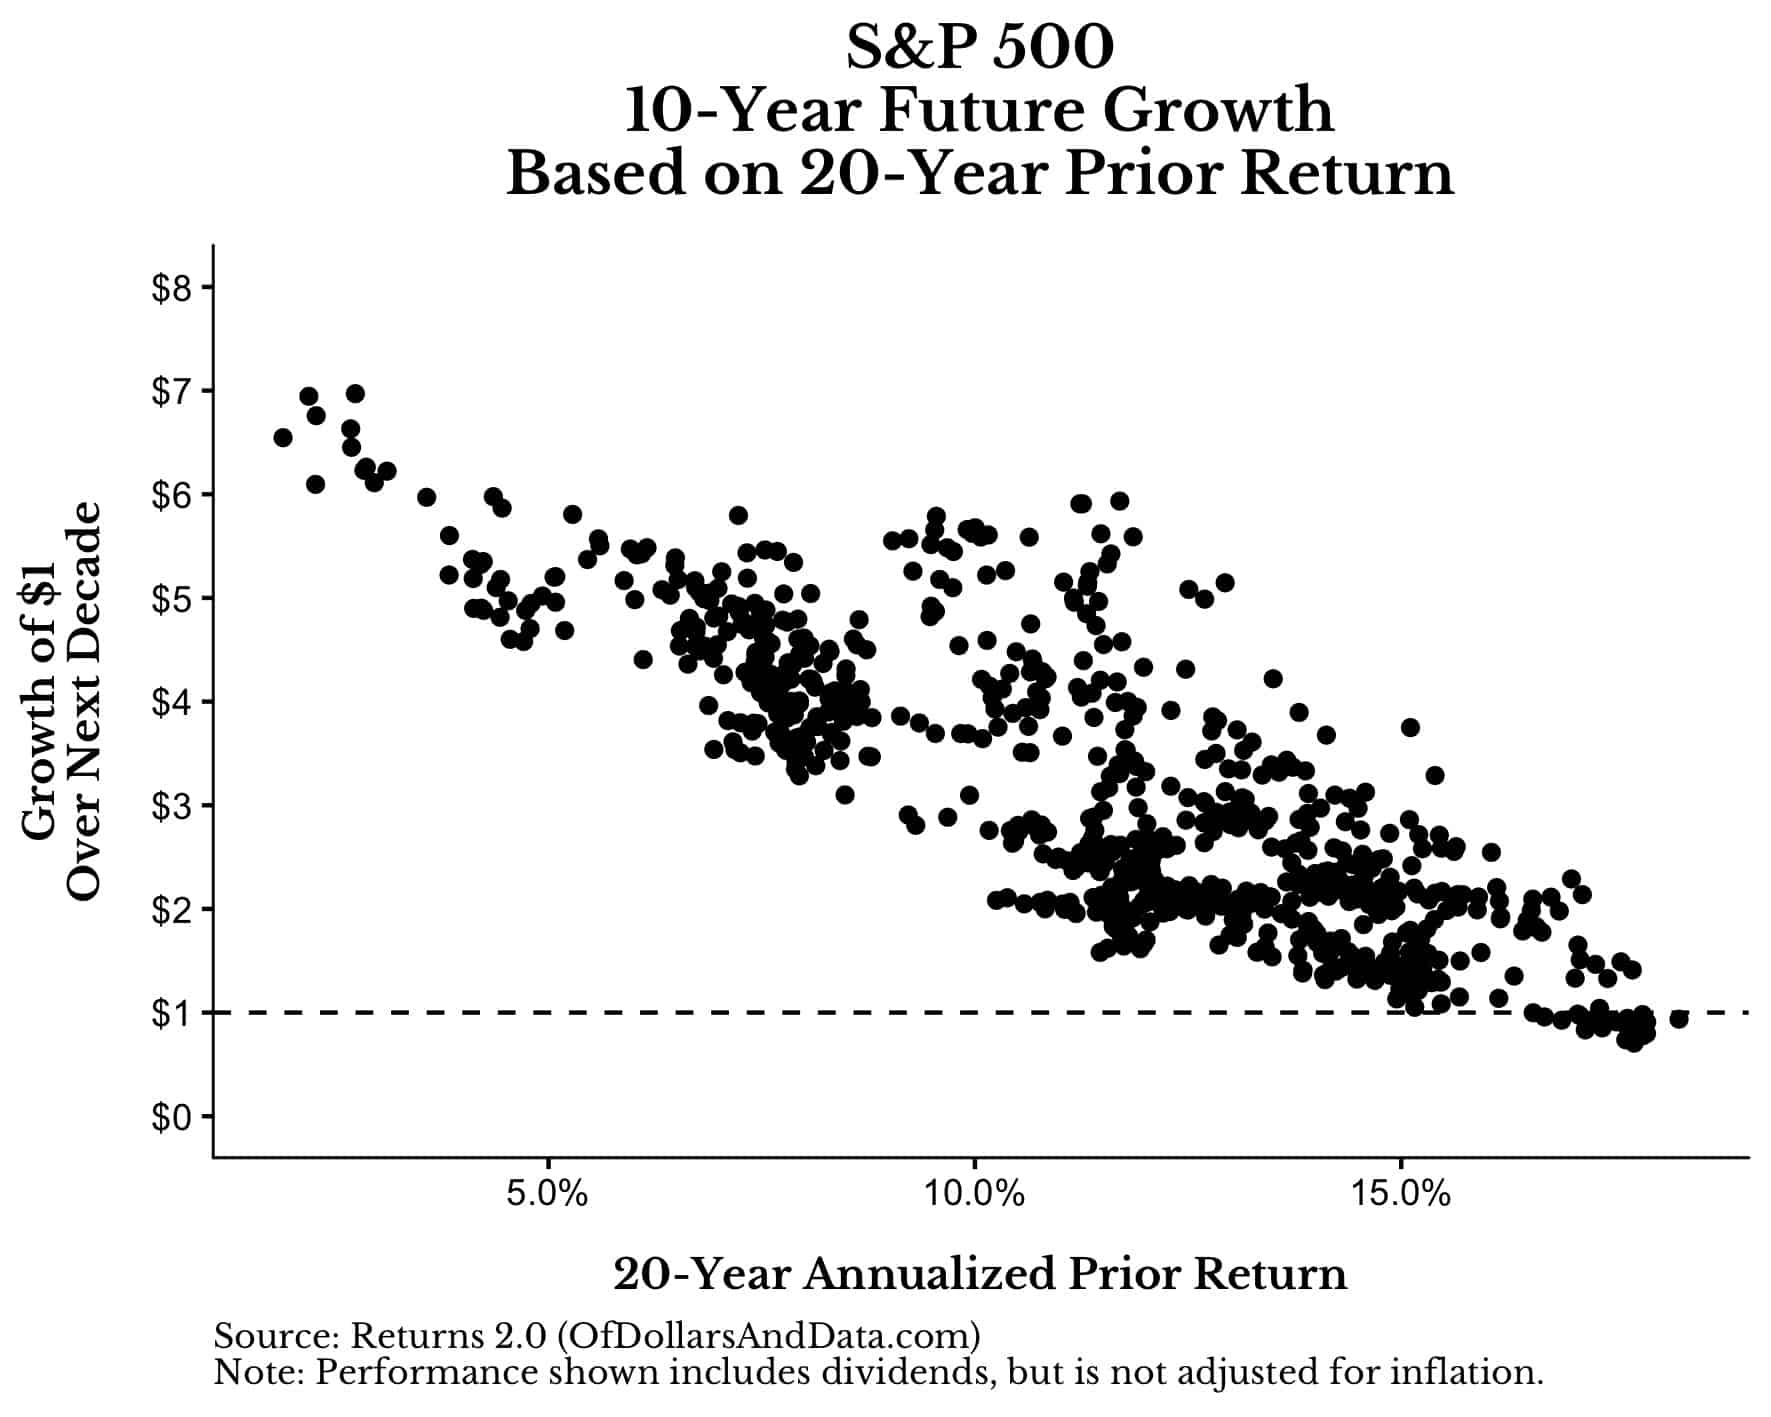 S&P 500 10-year future growth vs 20-year prior growth